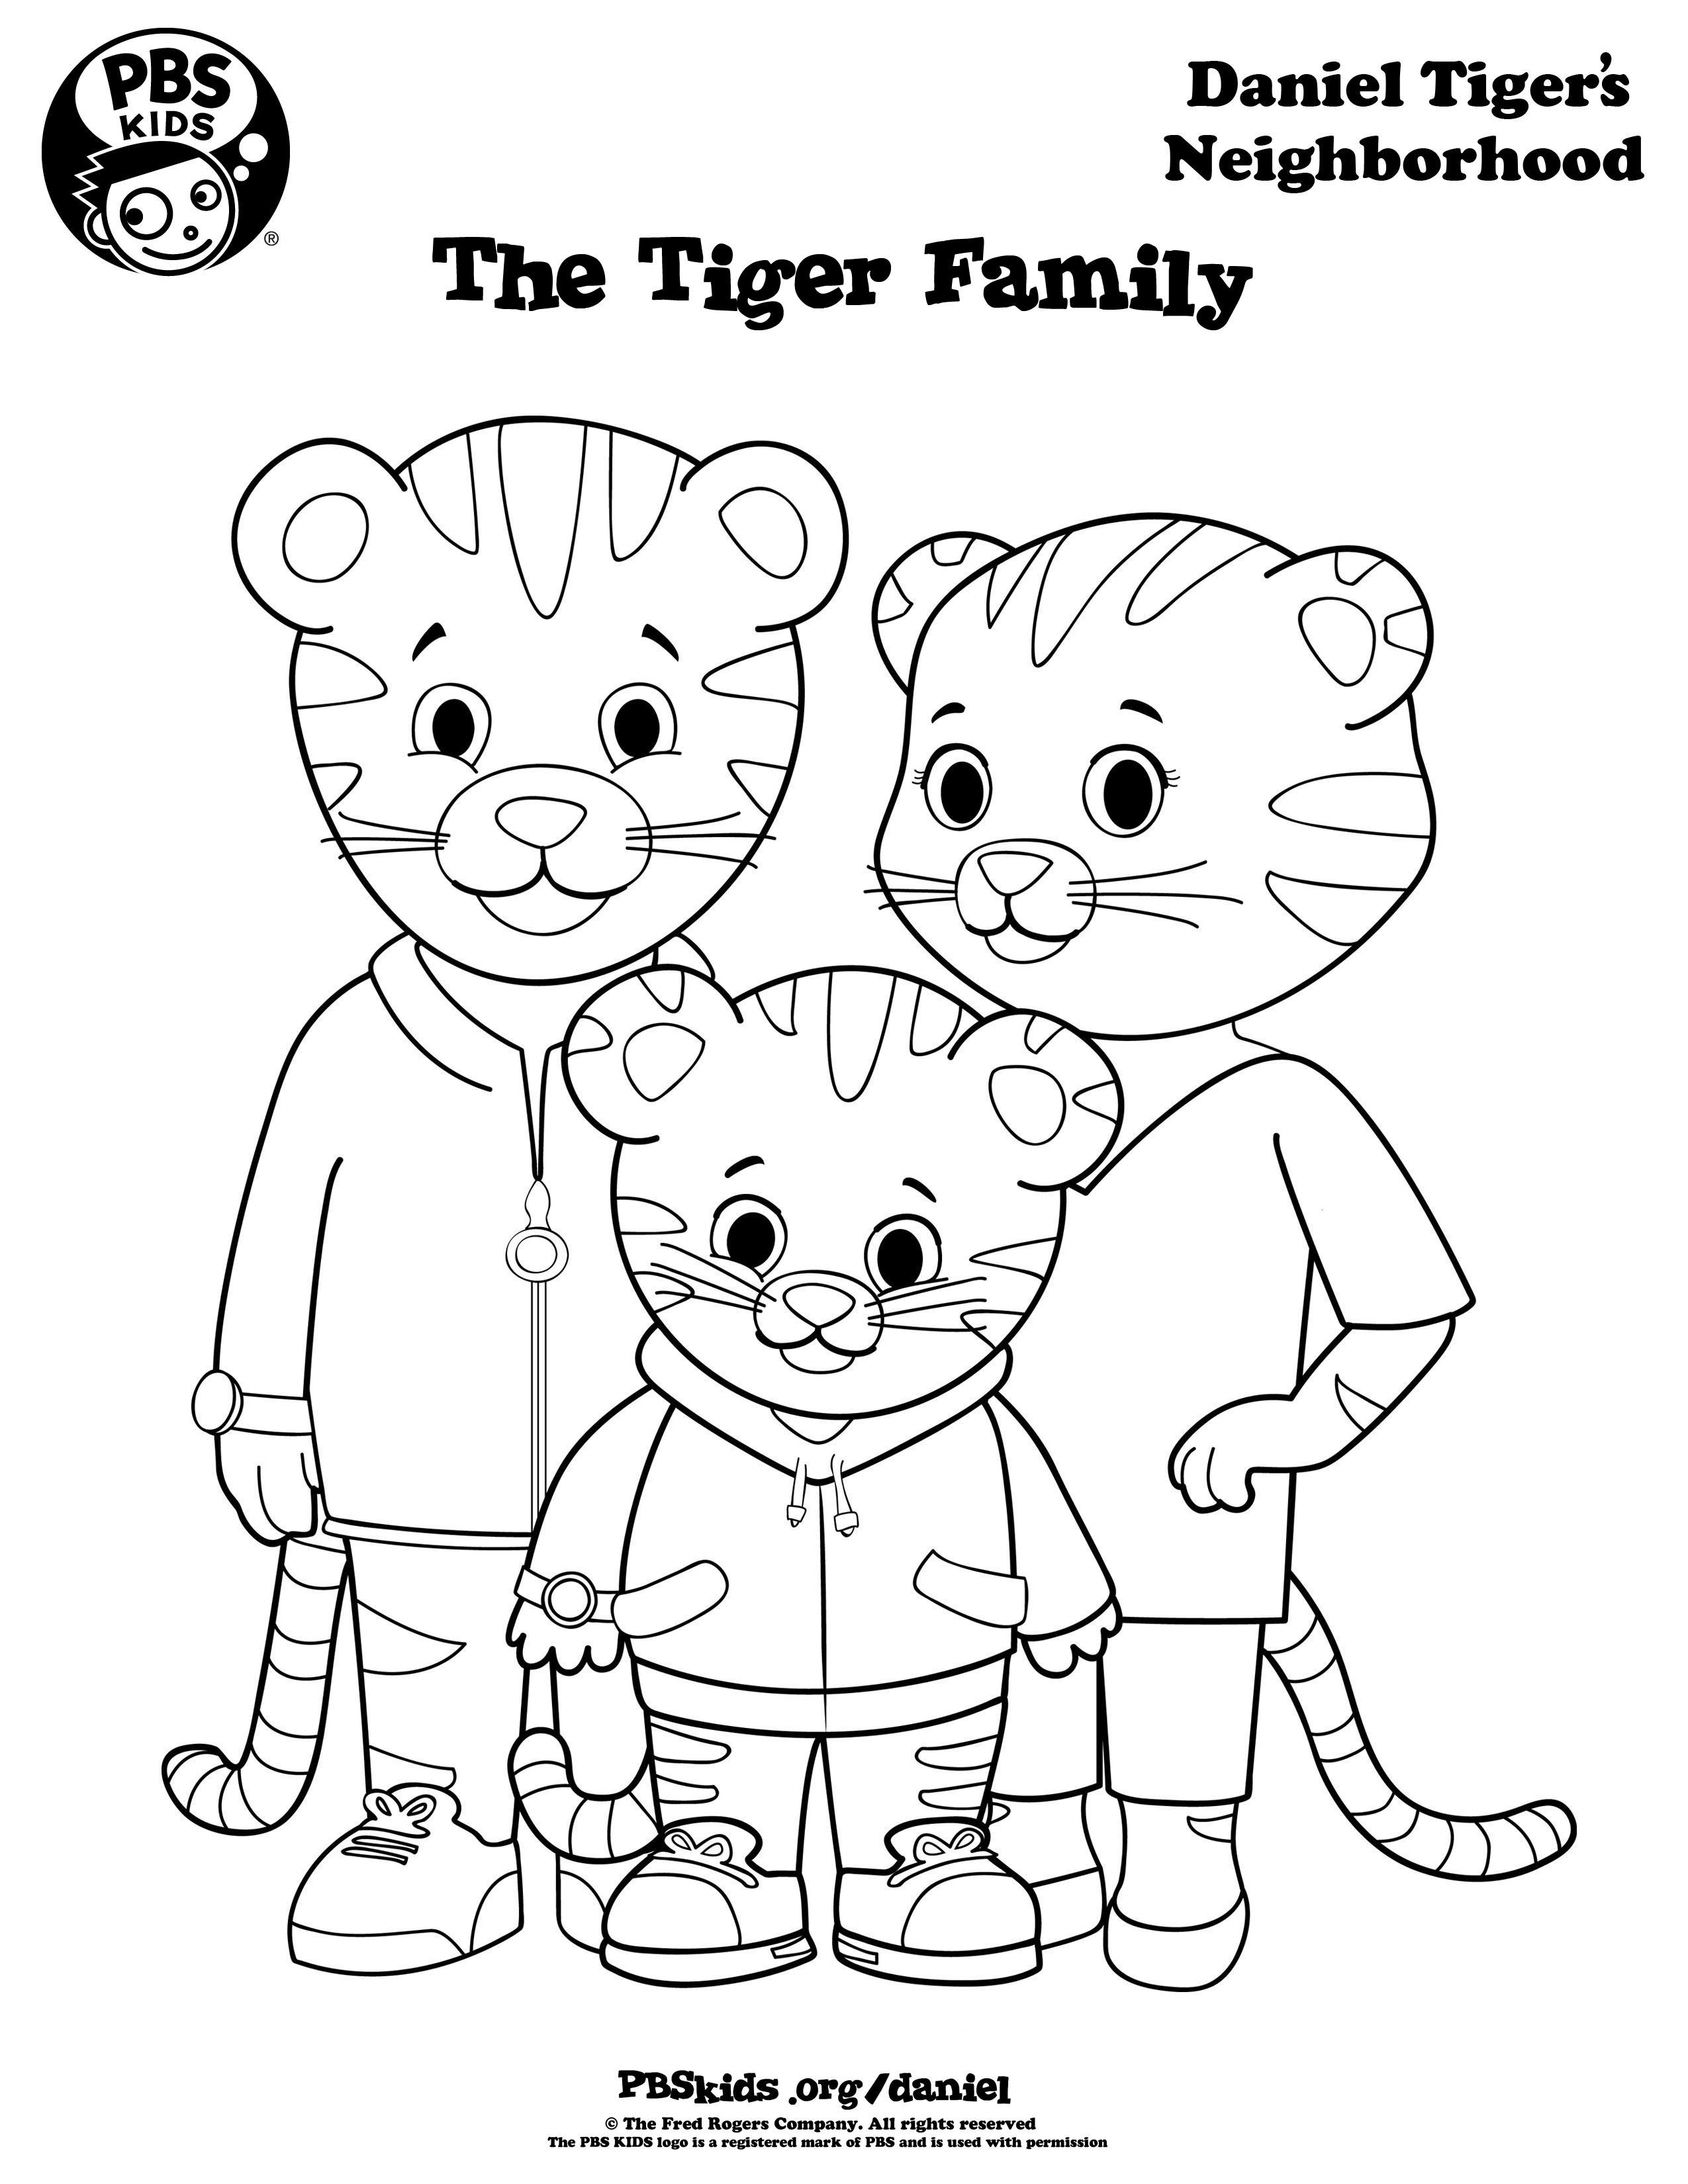 Print Out Grr-Rific Coloring Pages For Your Weekend Adventures - Free Printable Daniel Tiger Coloring Pages